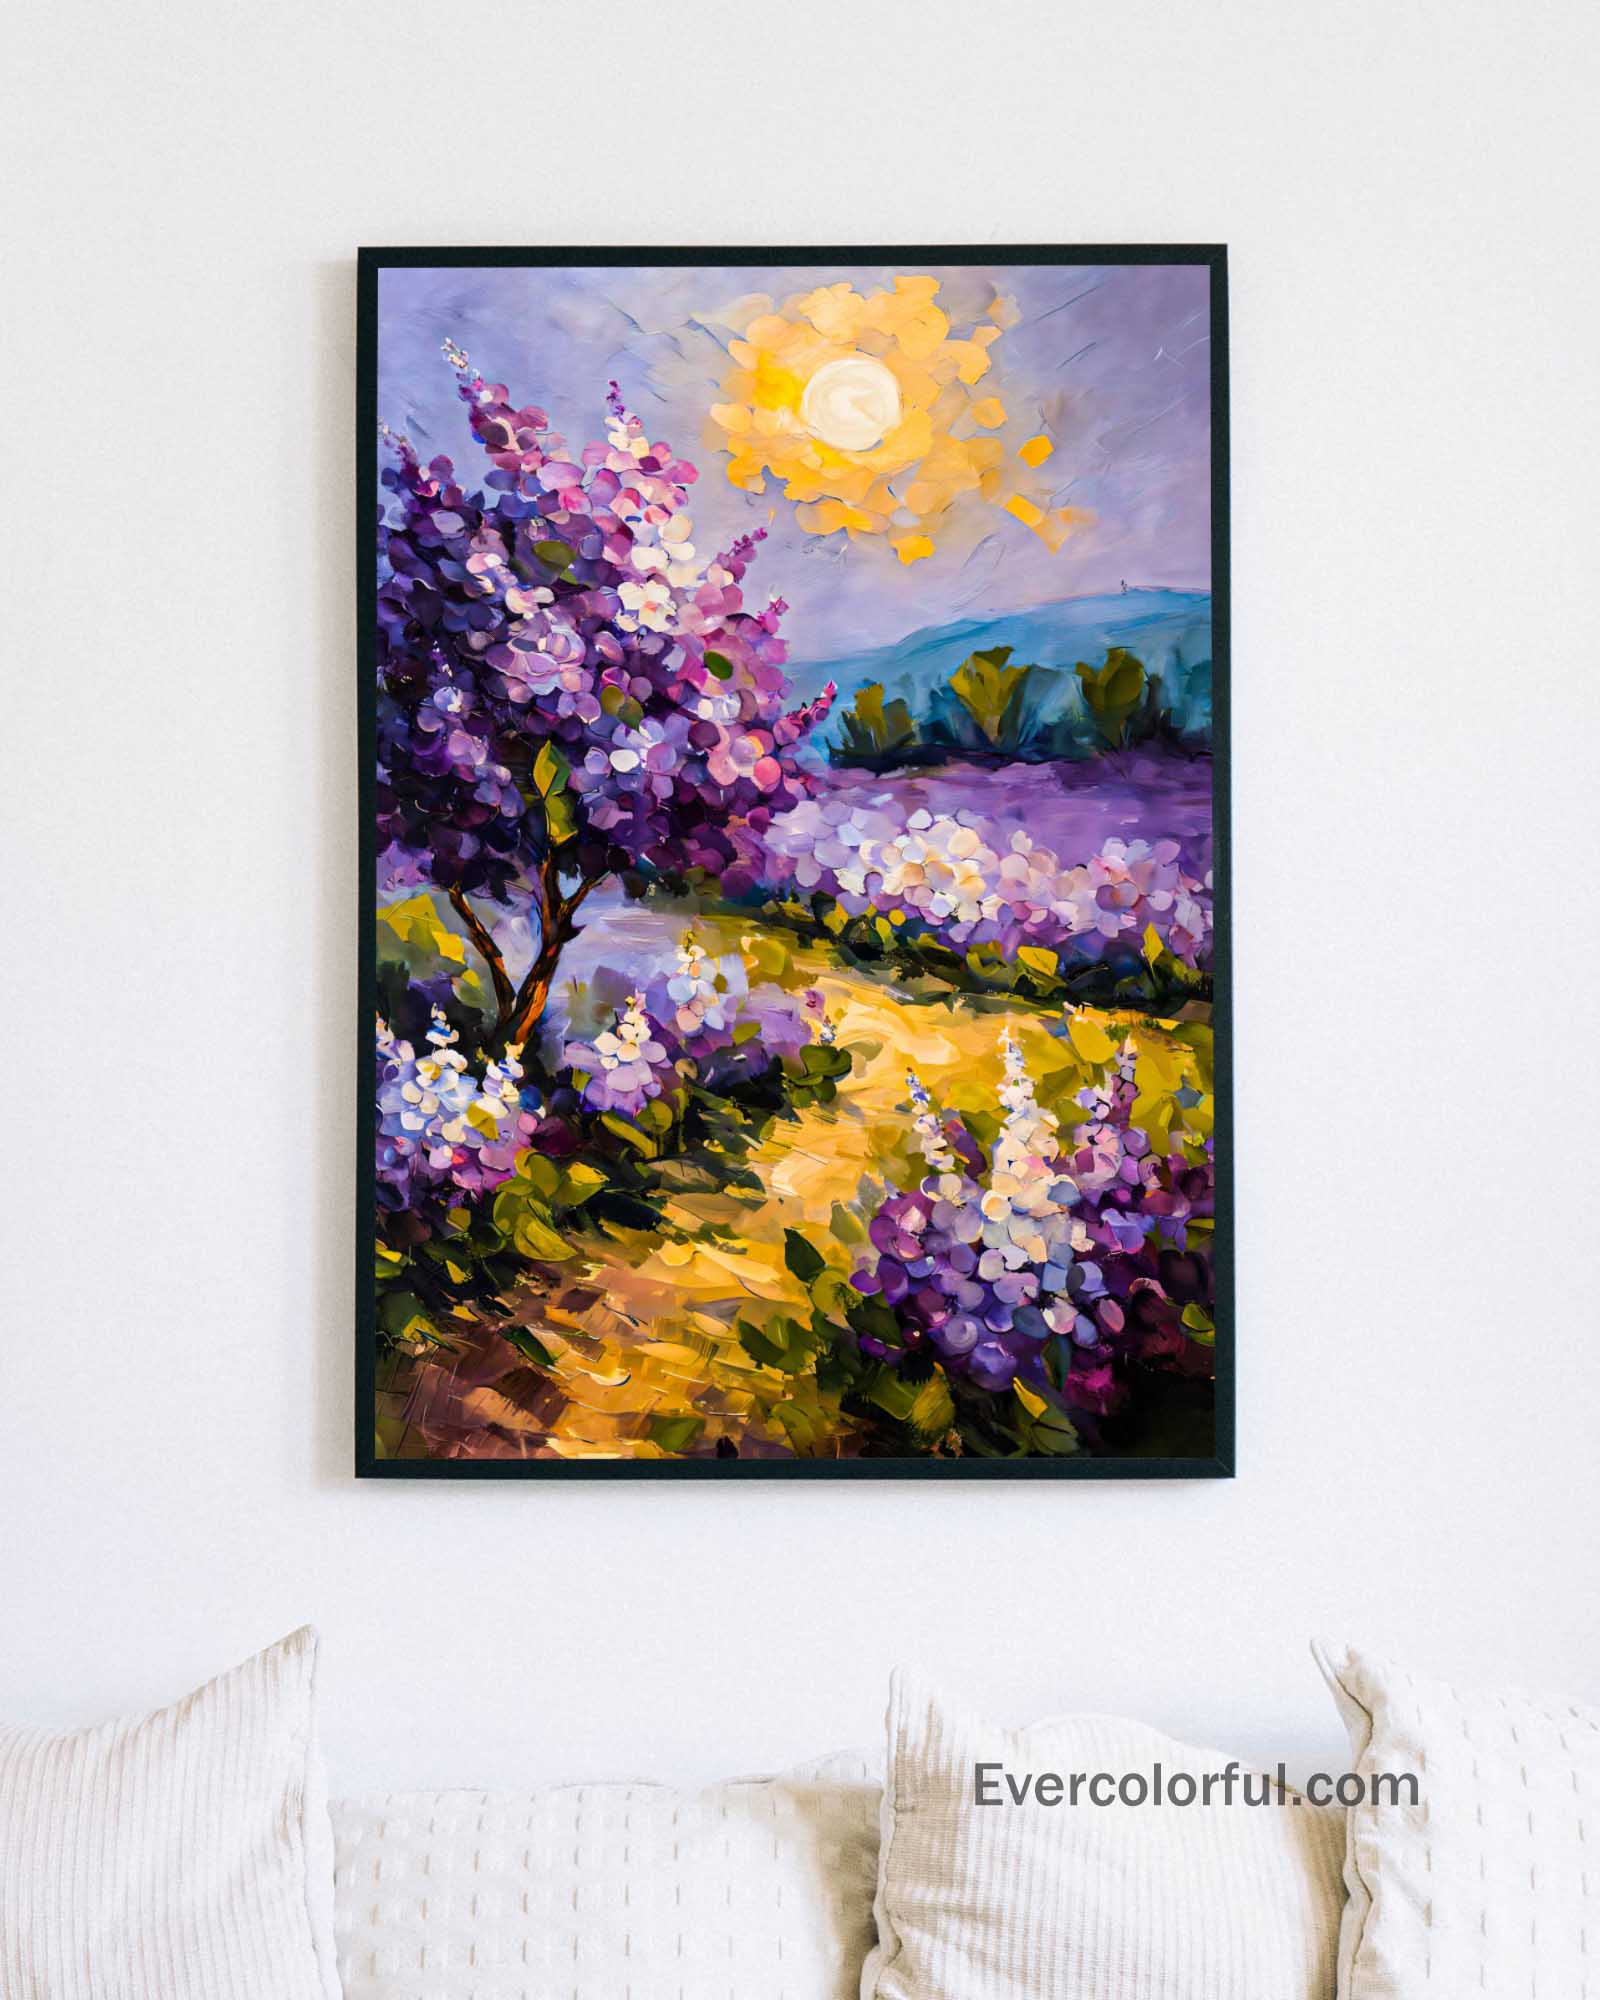 Violet serenity - Poster - Ever colorful